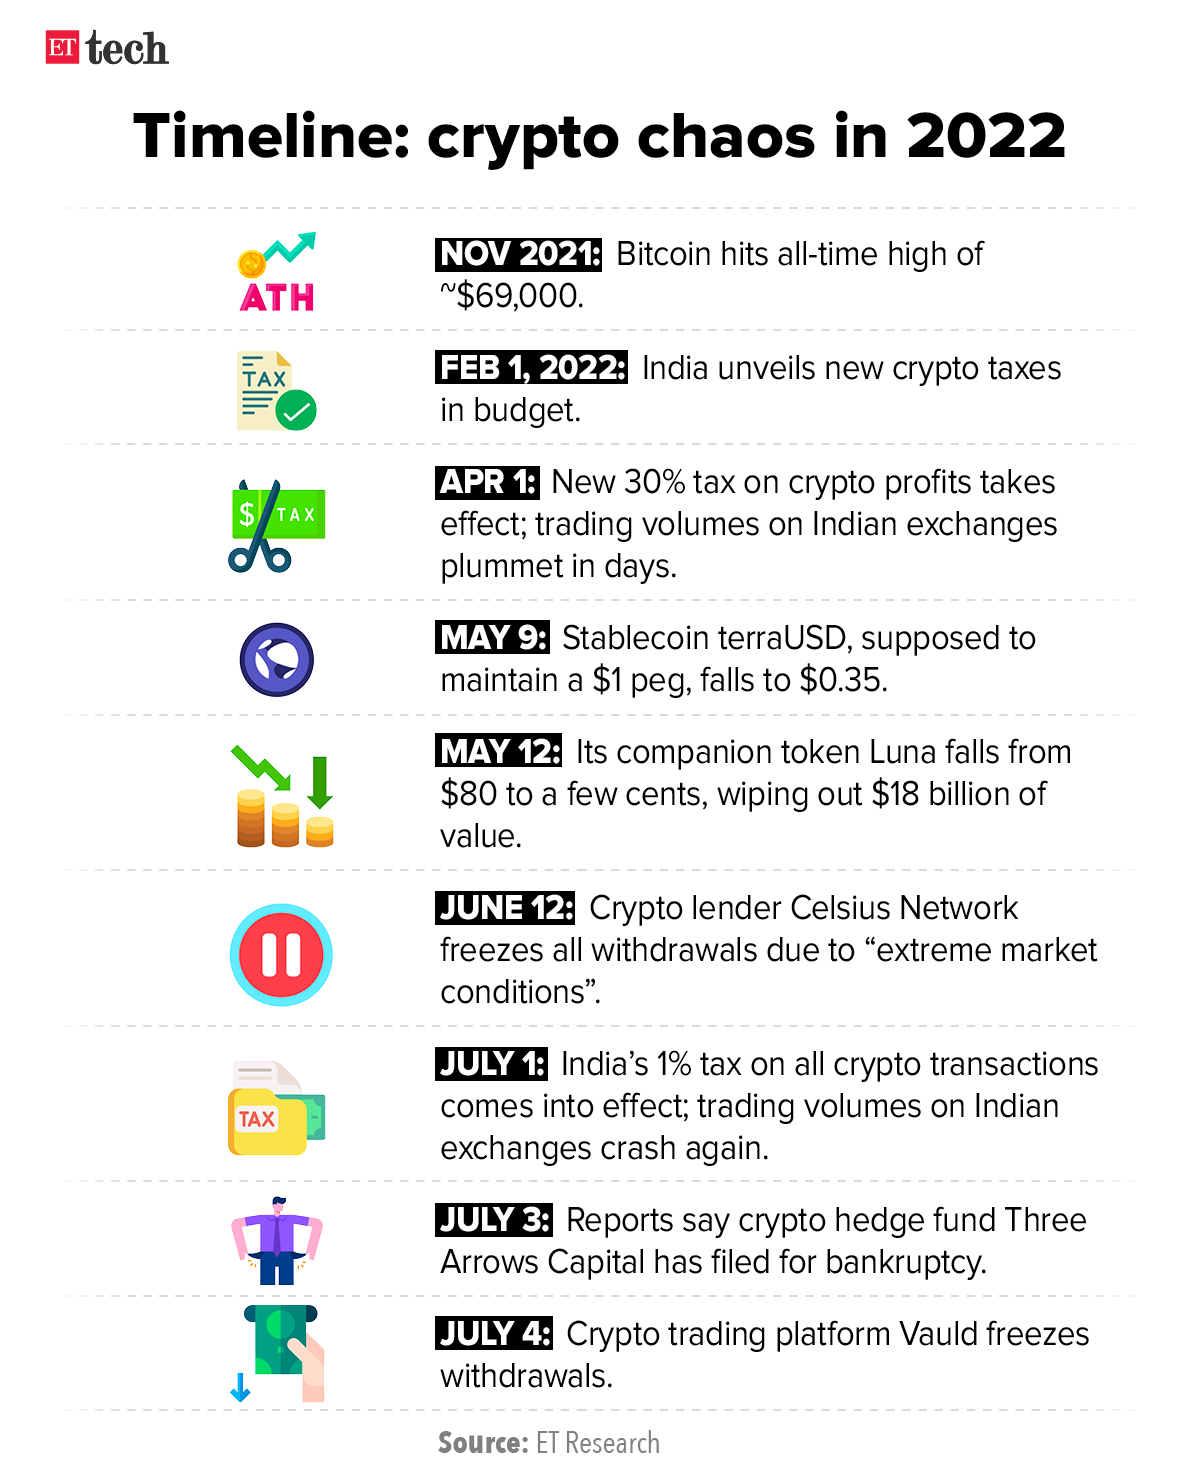 crypto chaos in 2022